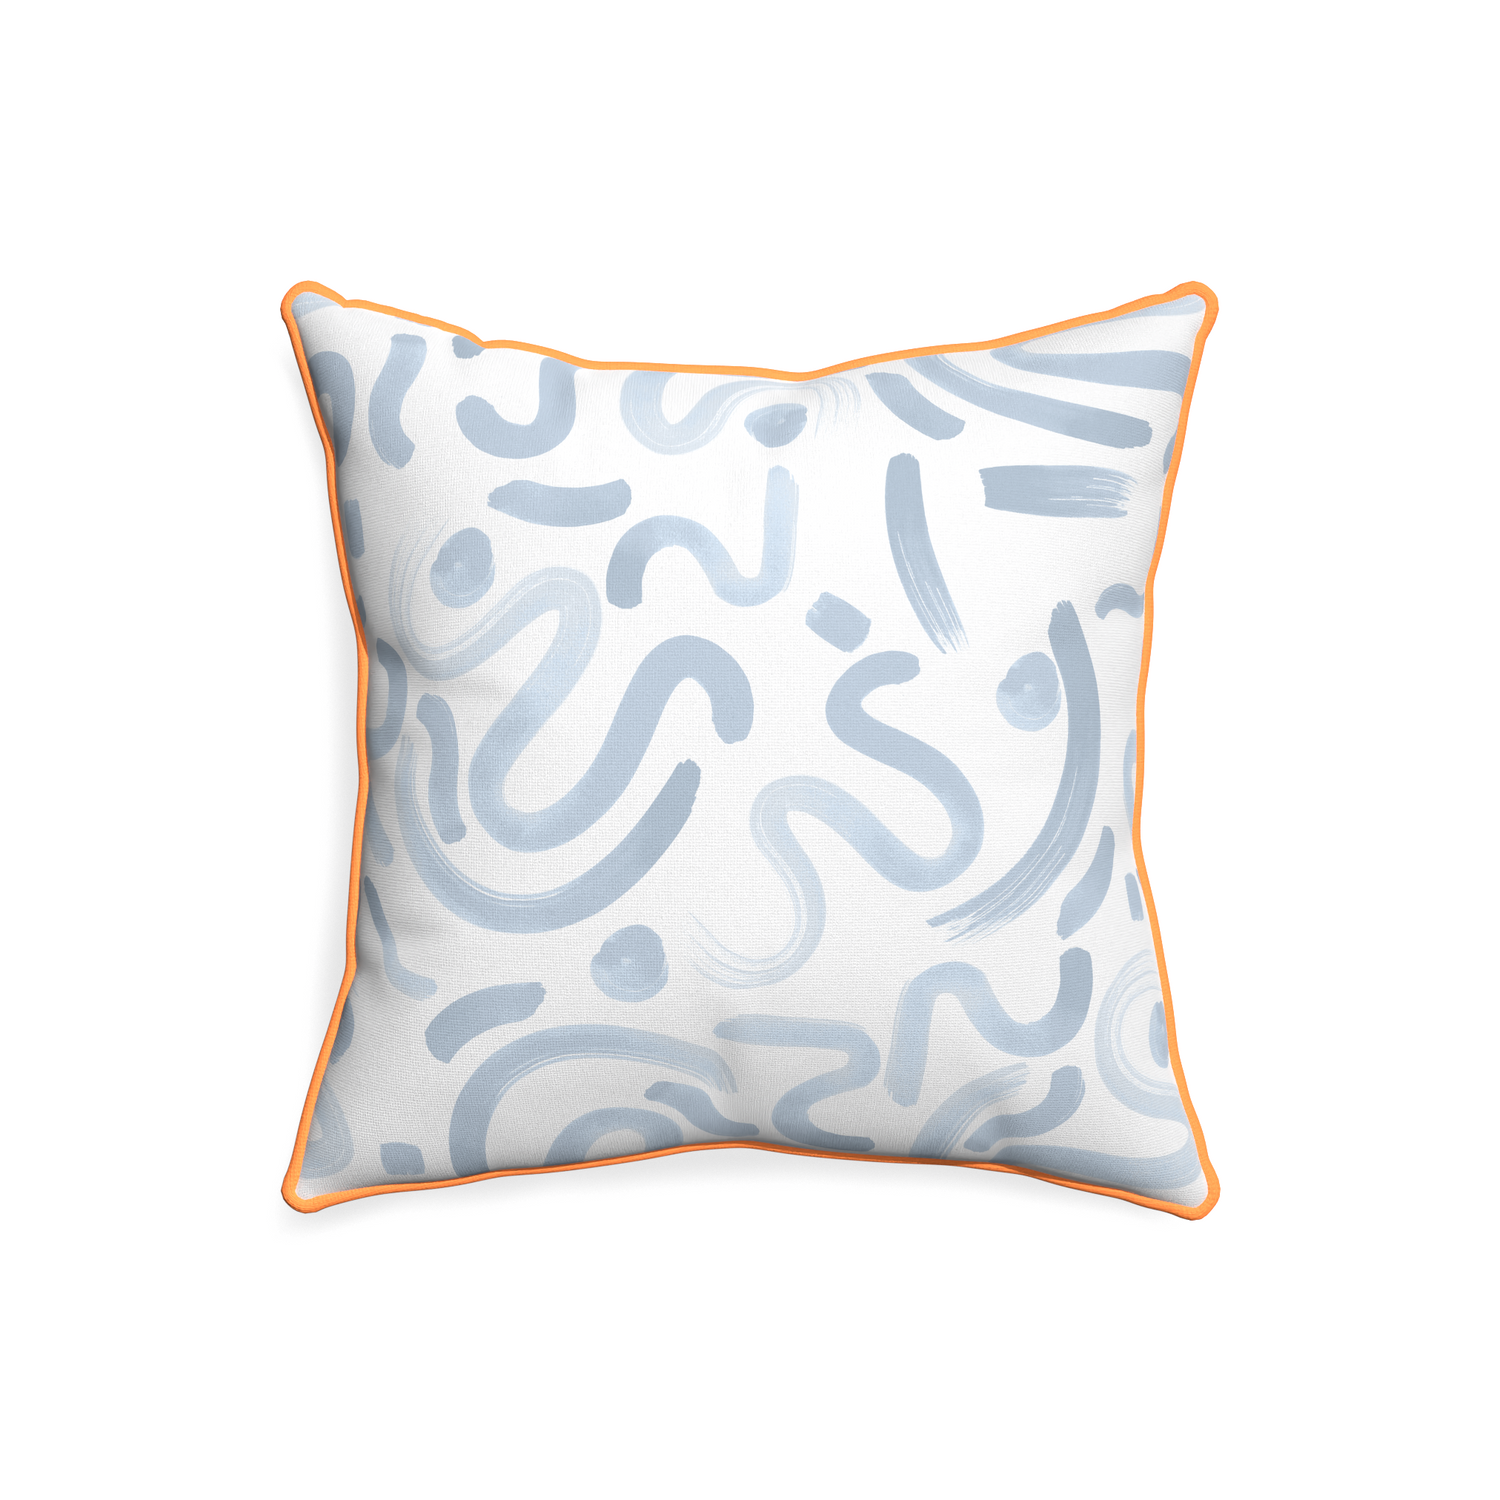 20-square hockney sky custom pillow with clementine piping on white background